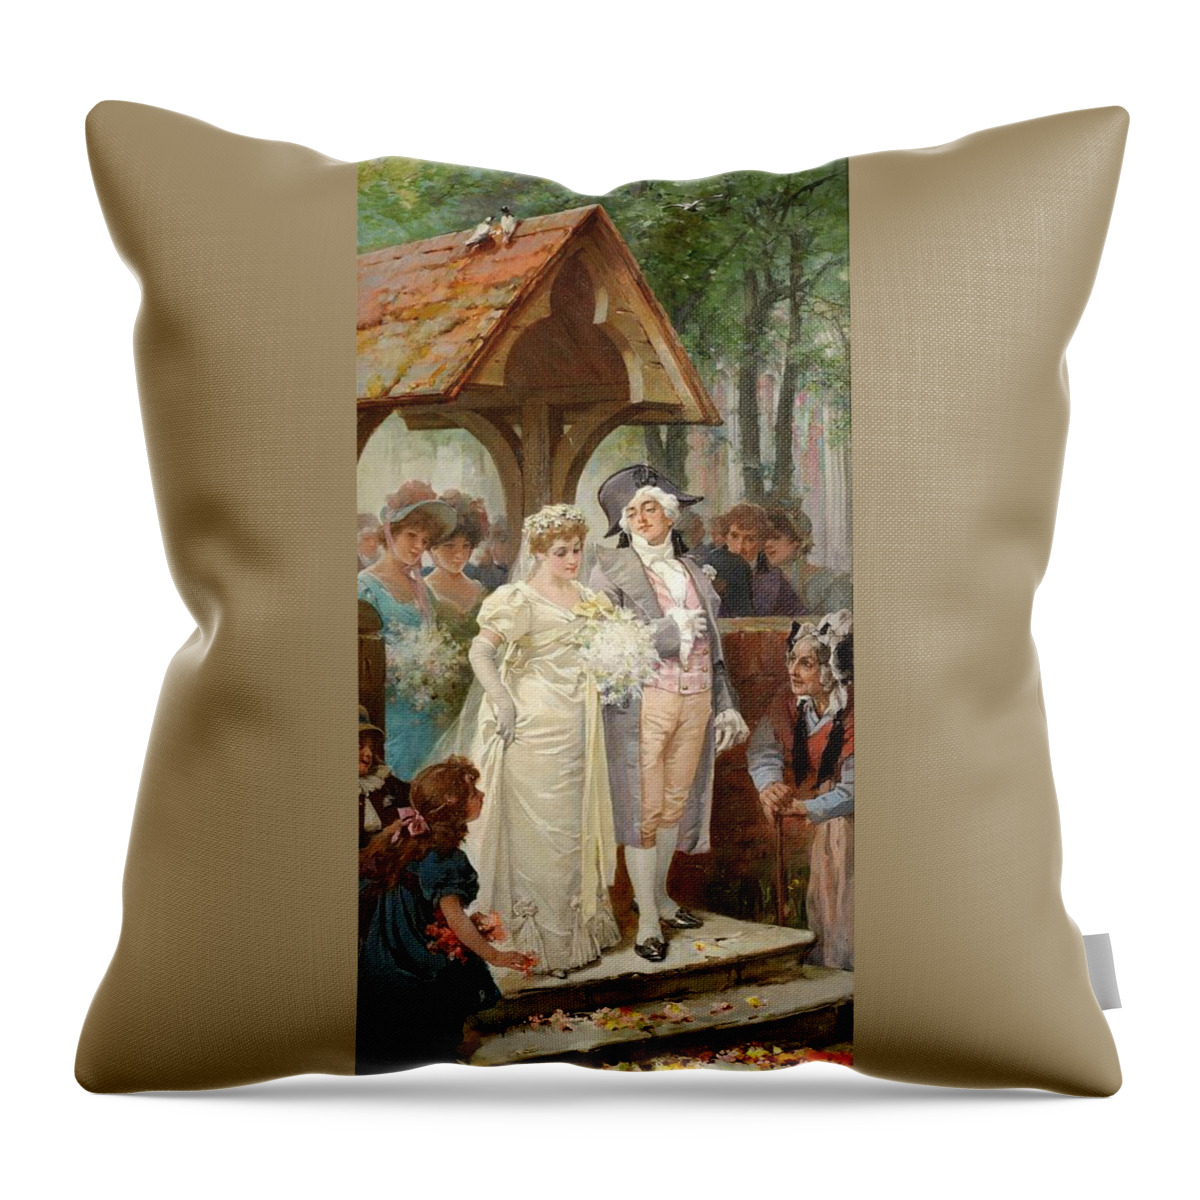 Marcus Stone 1840 - 1921 Throw Pillow featuring the painting Marcus Stone by MotionAge Designs